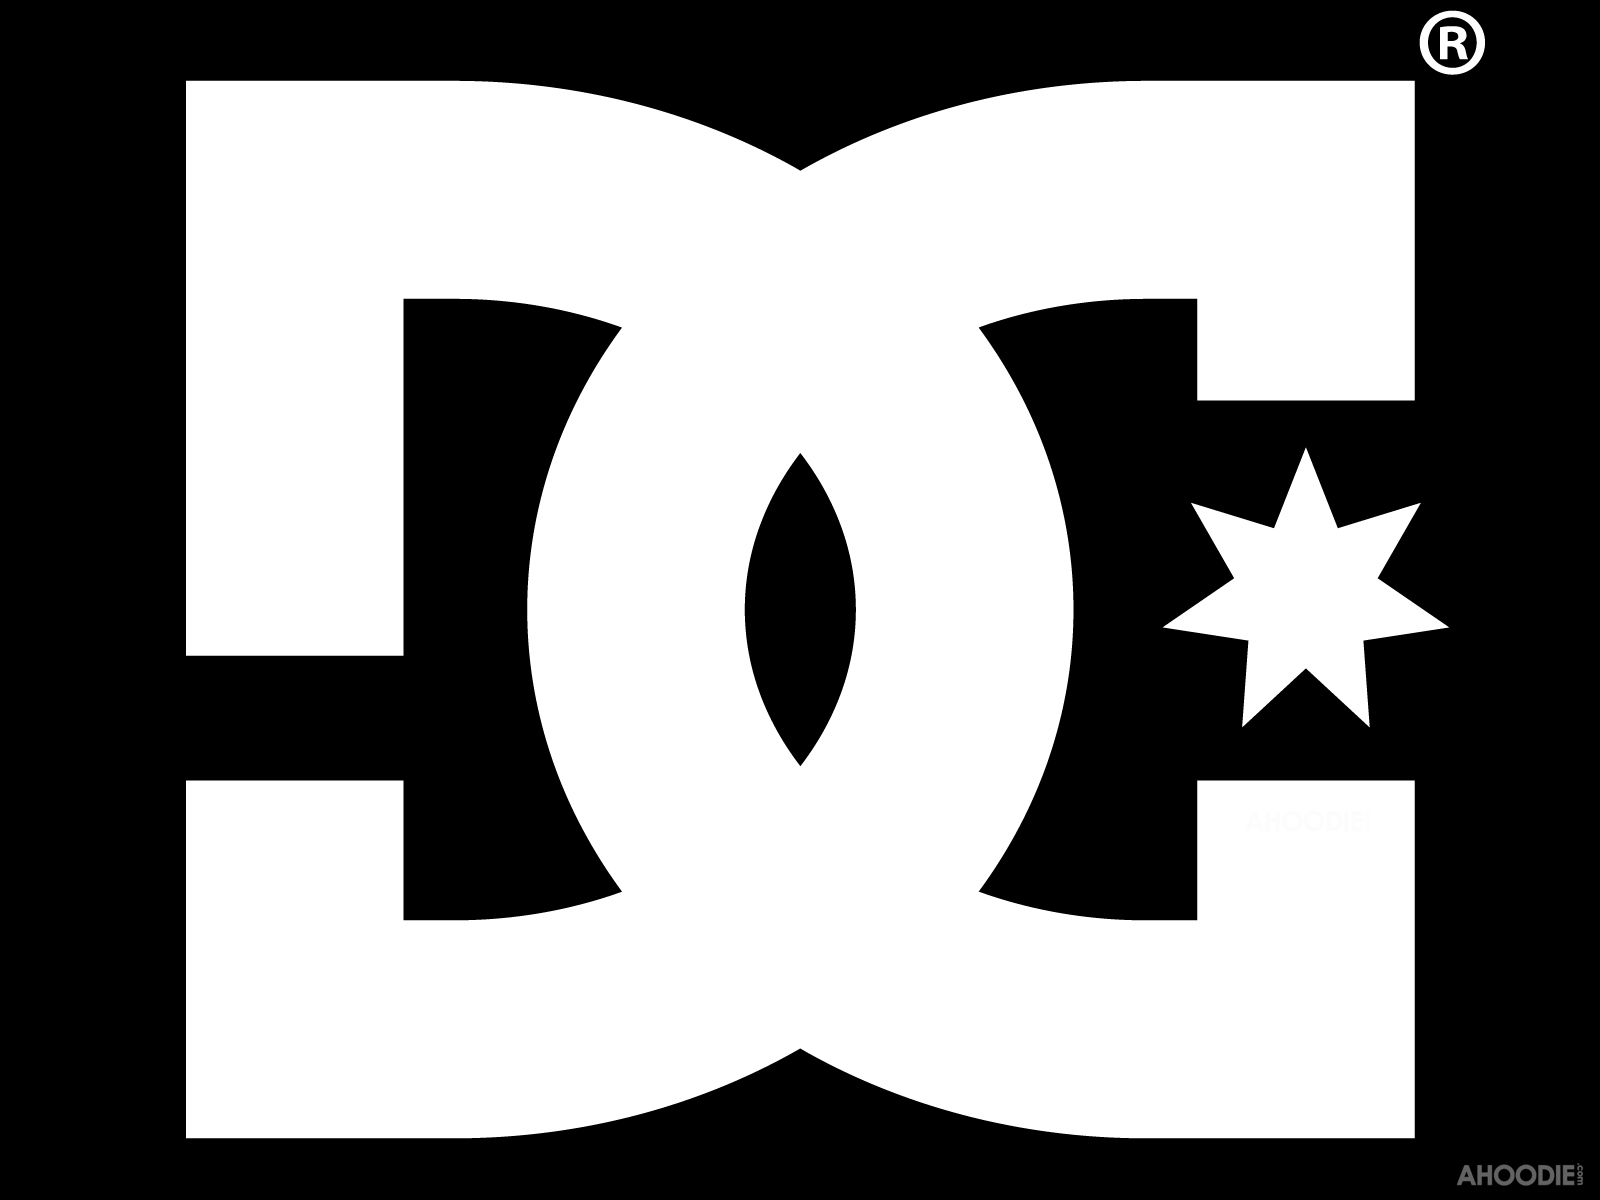 dc shoes symbol meaning